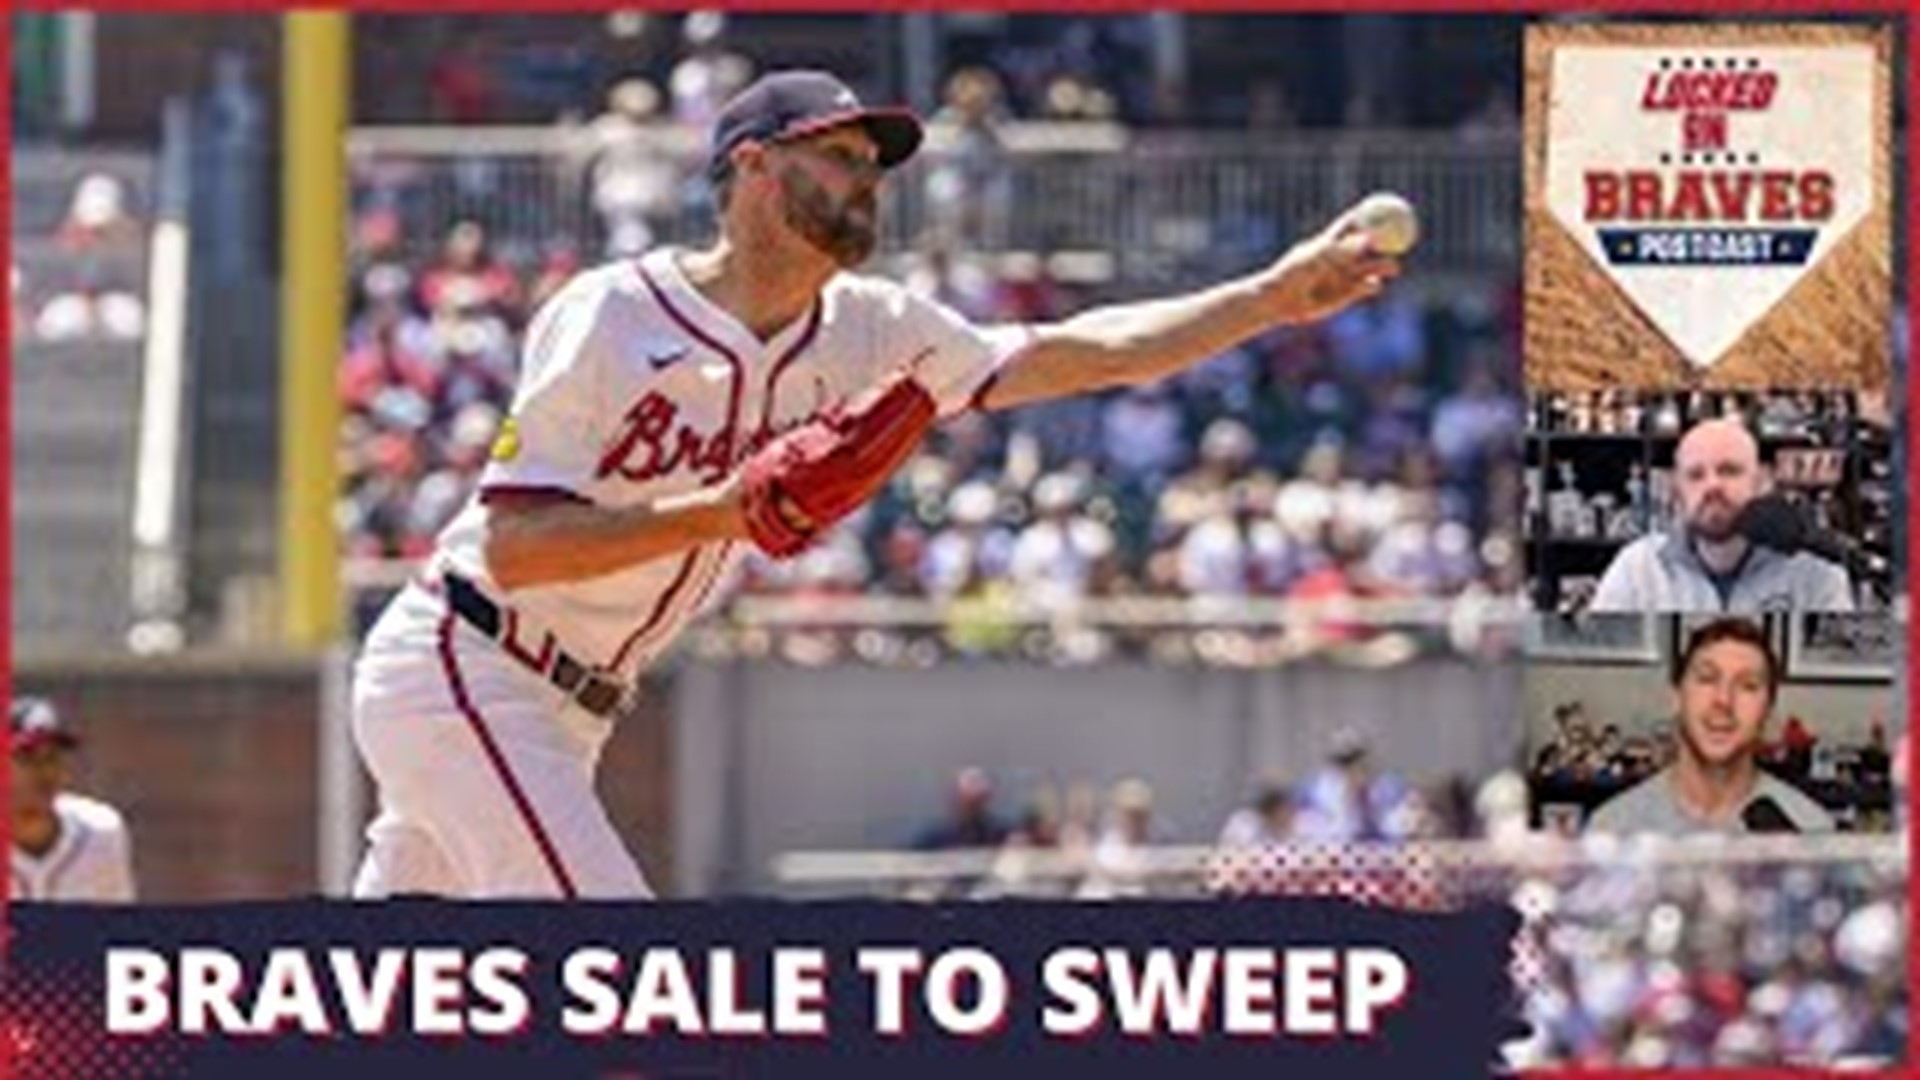 The Atlanta Braves got some key home runs, a solid start from Chris Sale and more scoreless relief from the bullpen to finish off a three-game sweep.